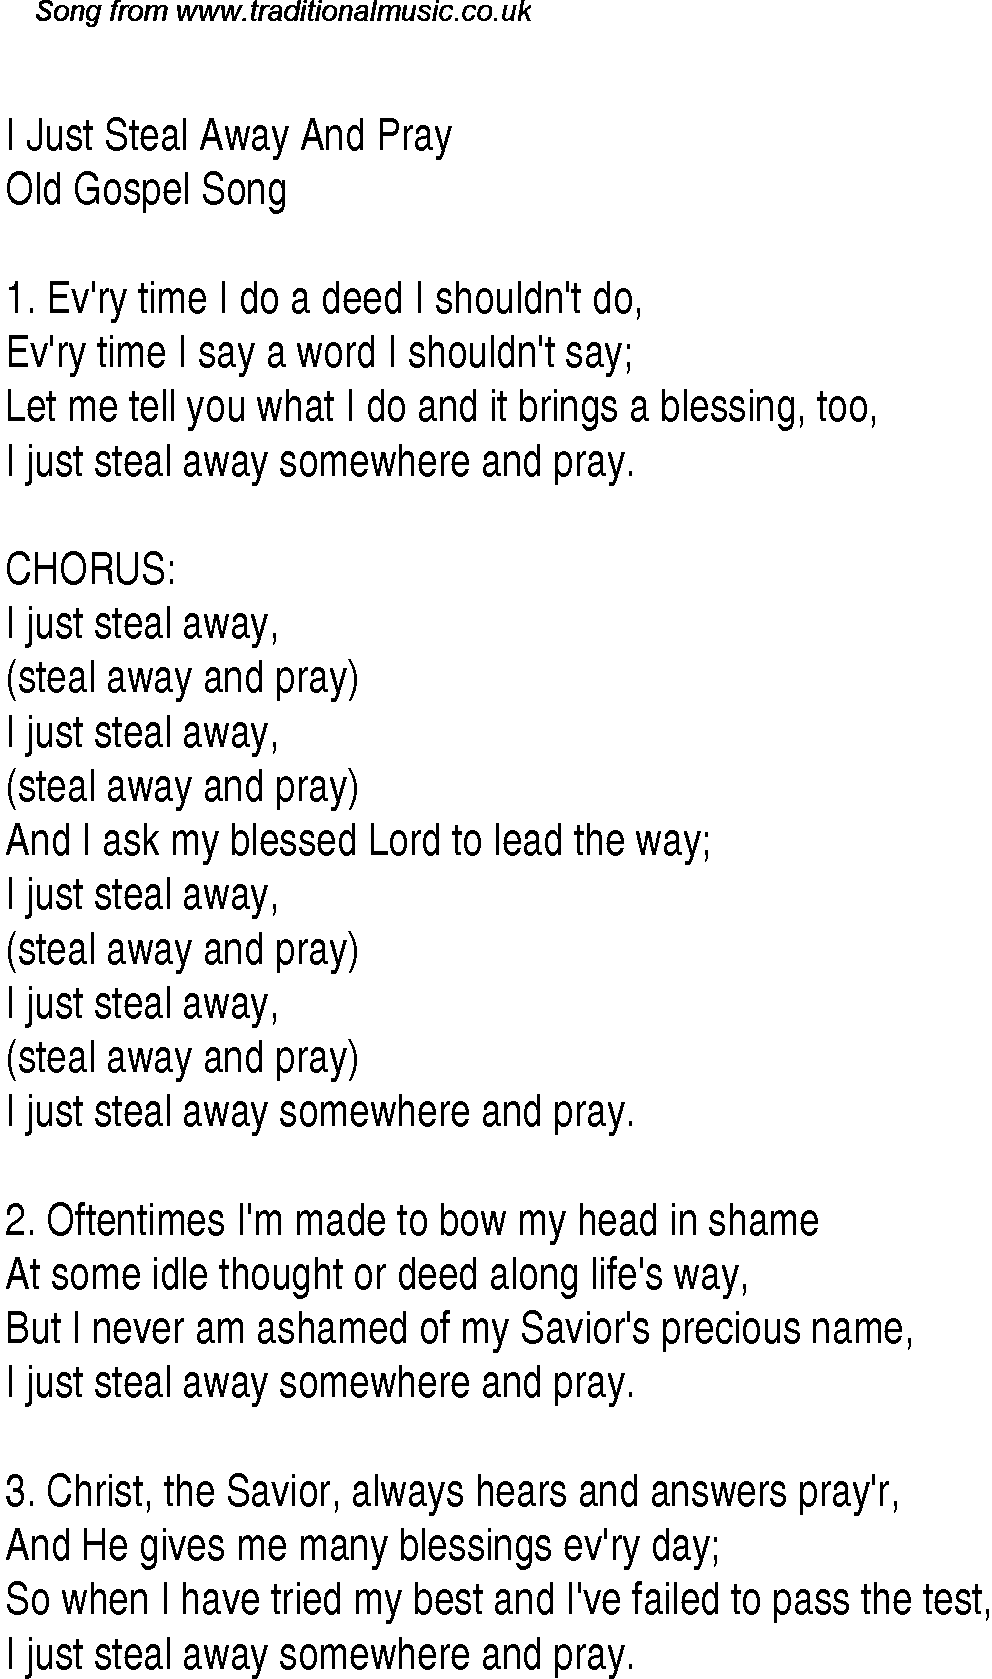 Gospel Song: i-just-steal-away-and-pray, lyrics and chords.